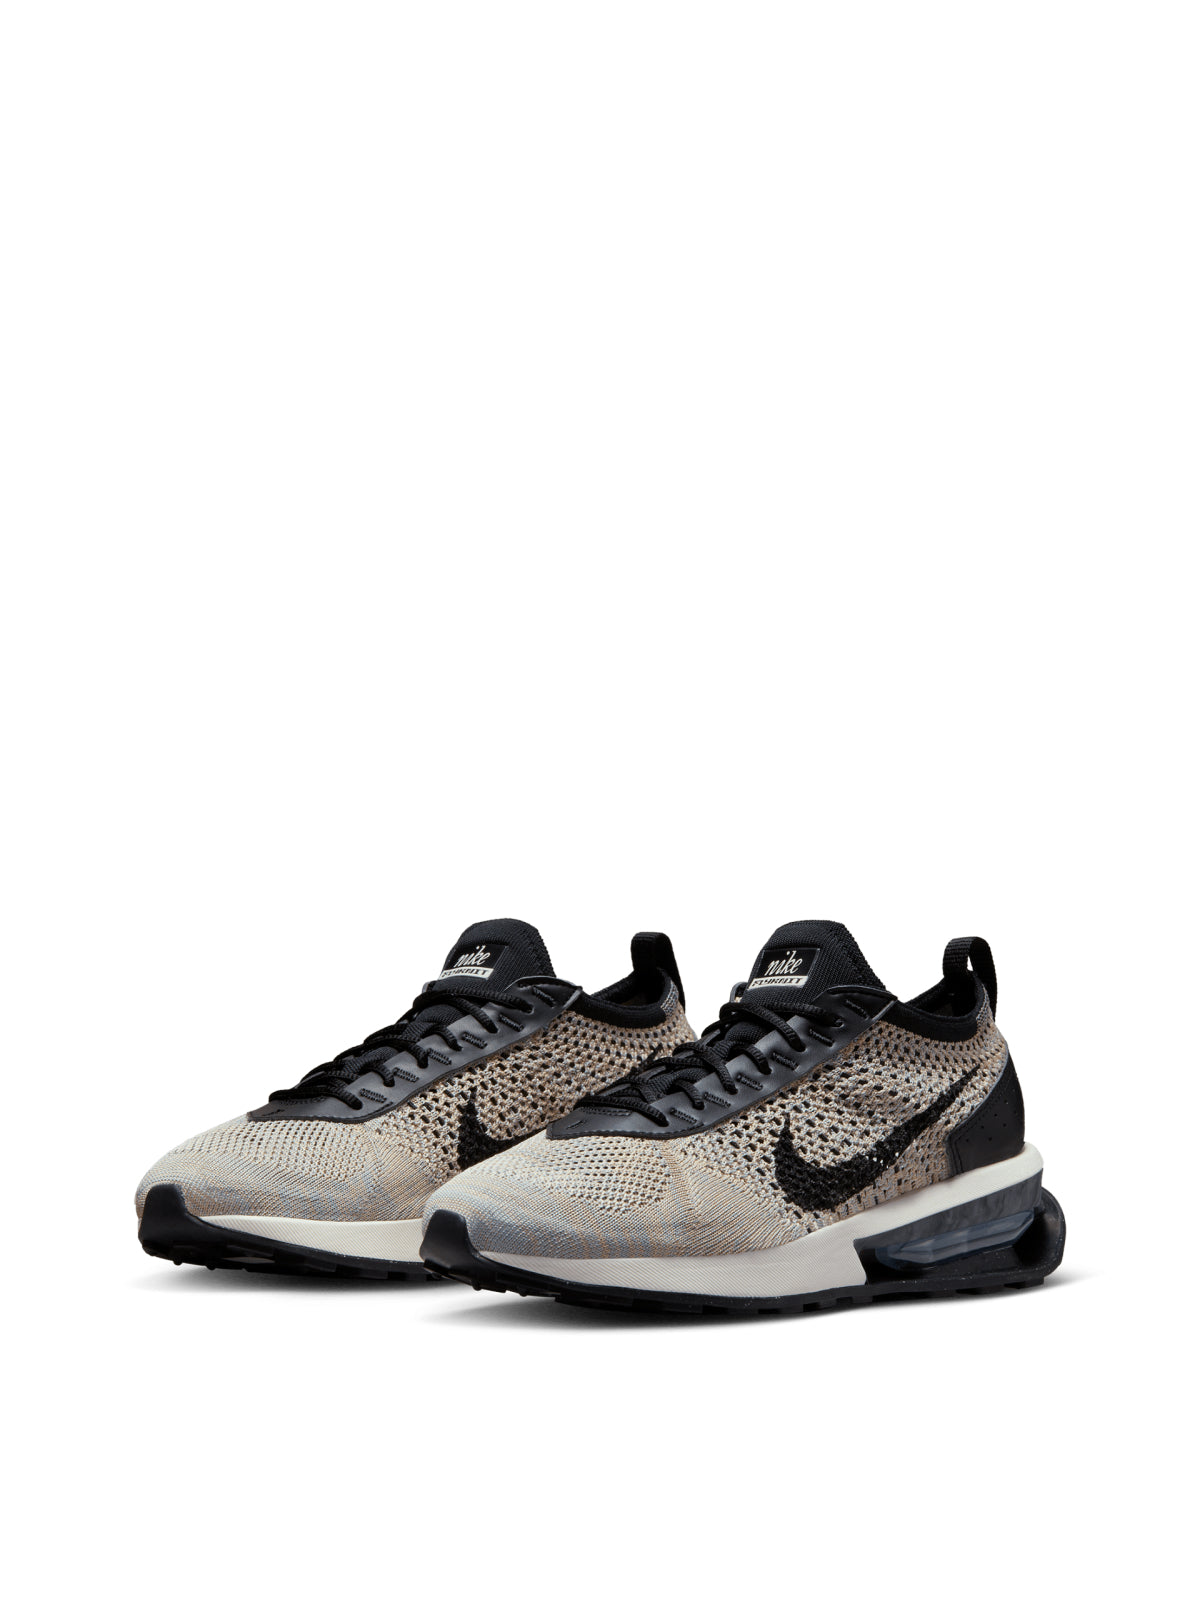 Nike-OUTLET-SALE-Air Max Flyknit Racer Sneakers-ARCHIVIST